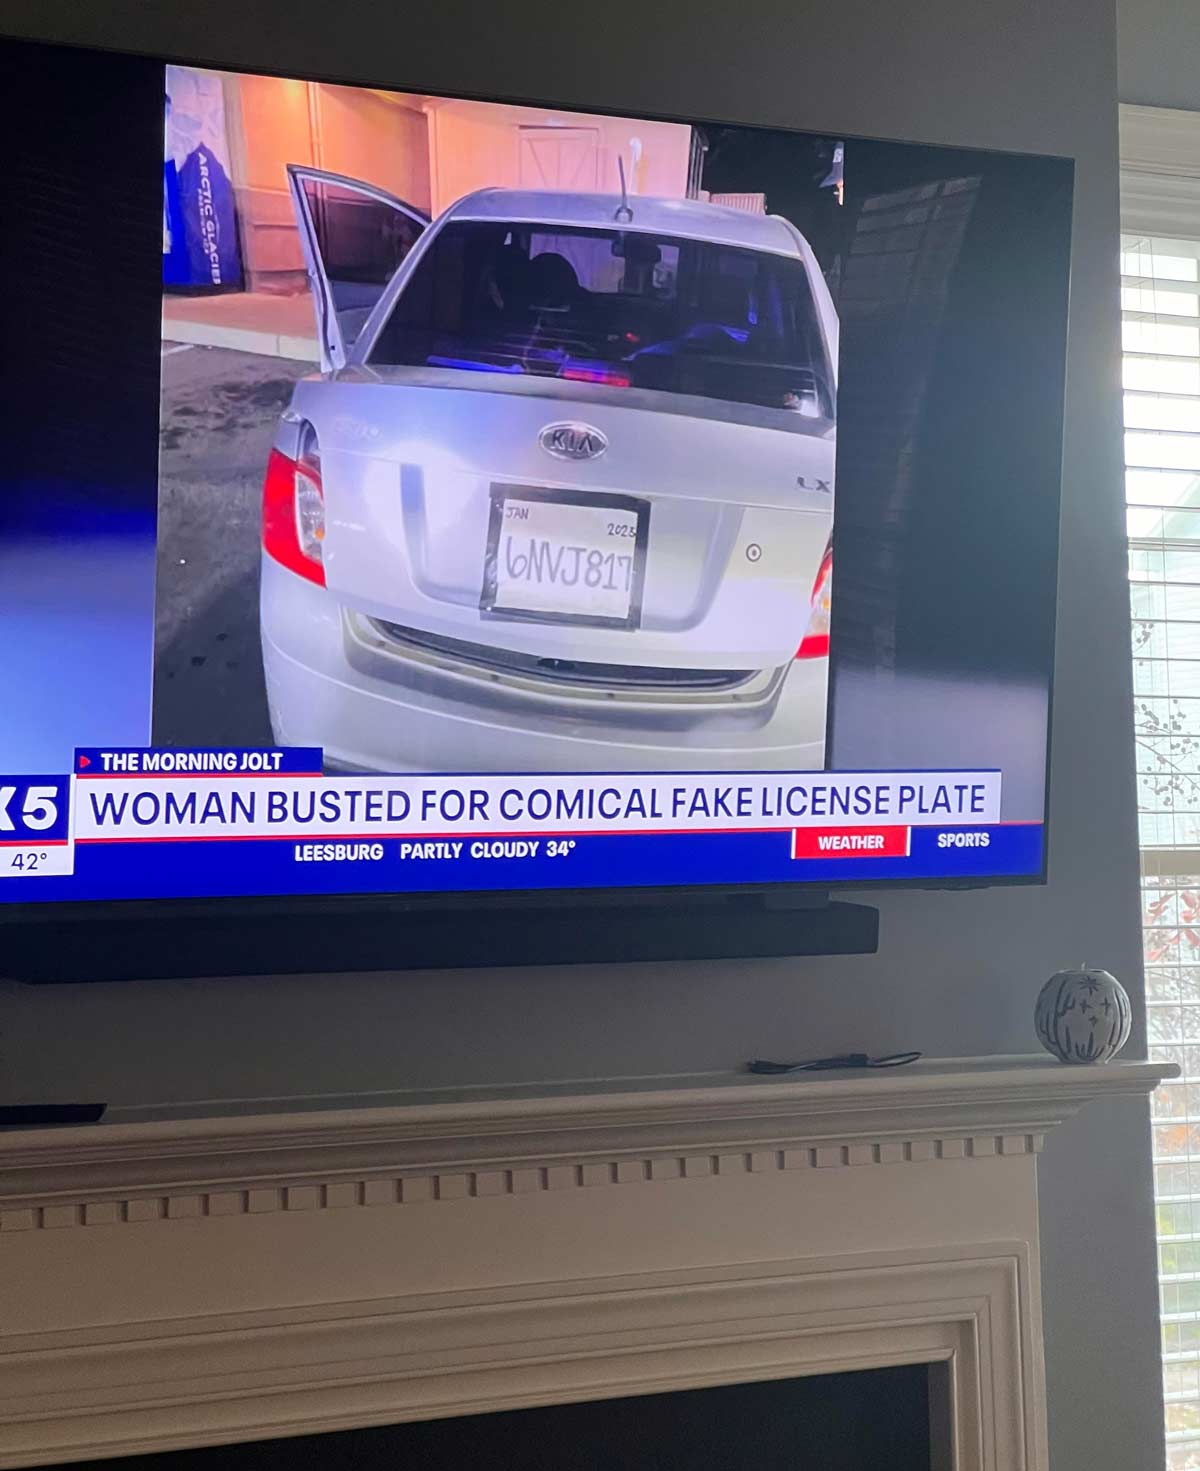 Saw this on the news this morning